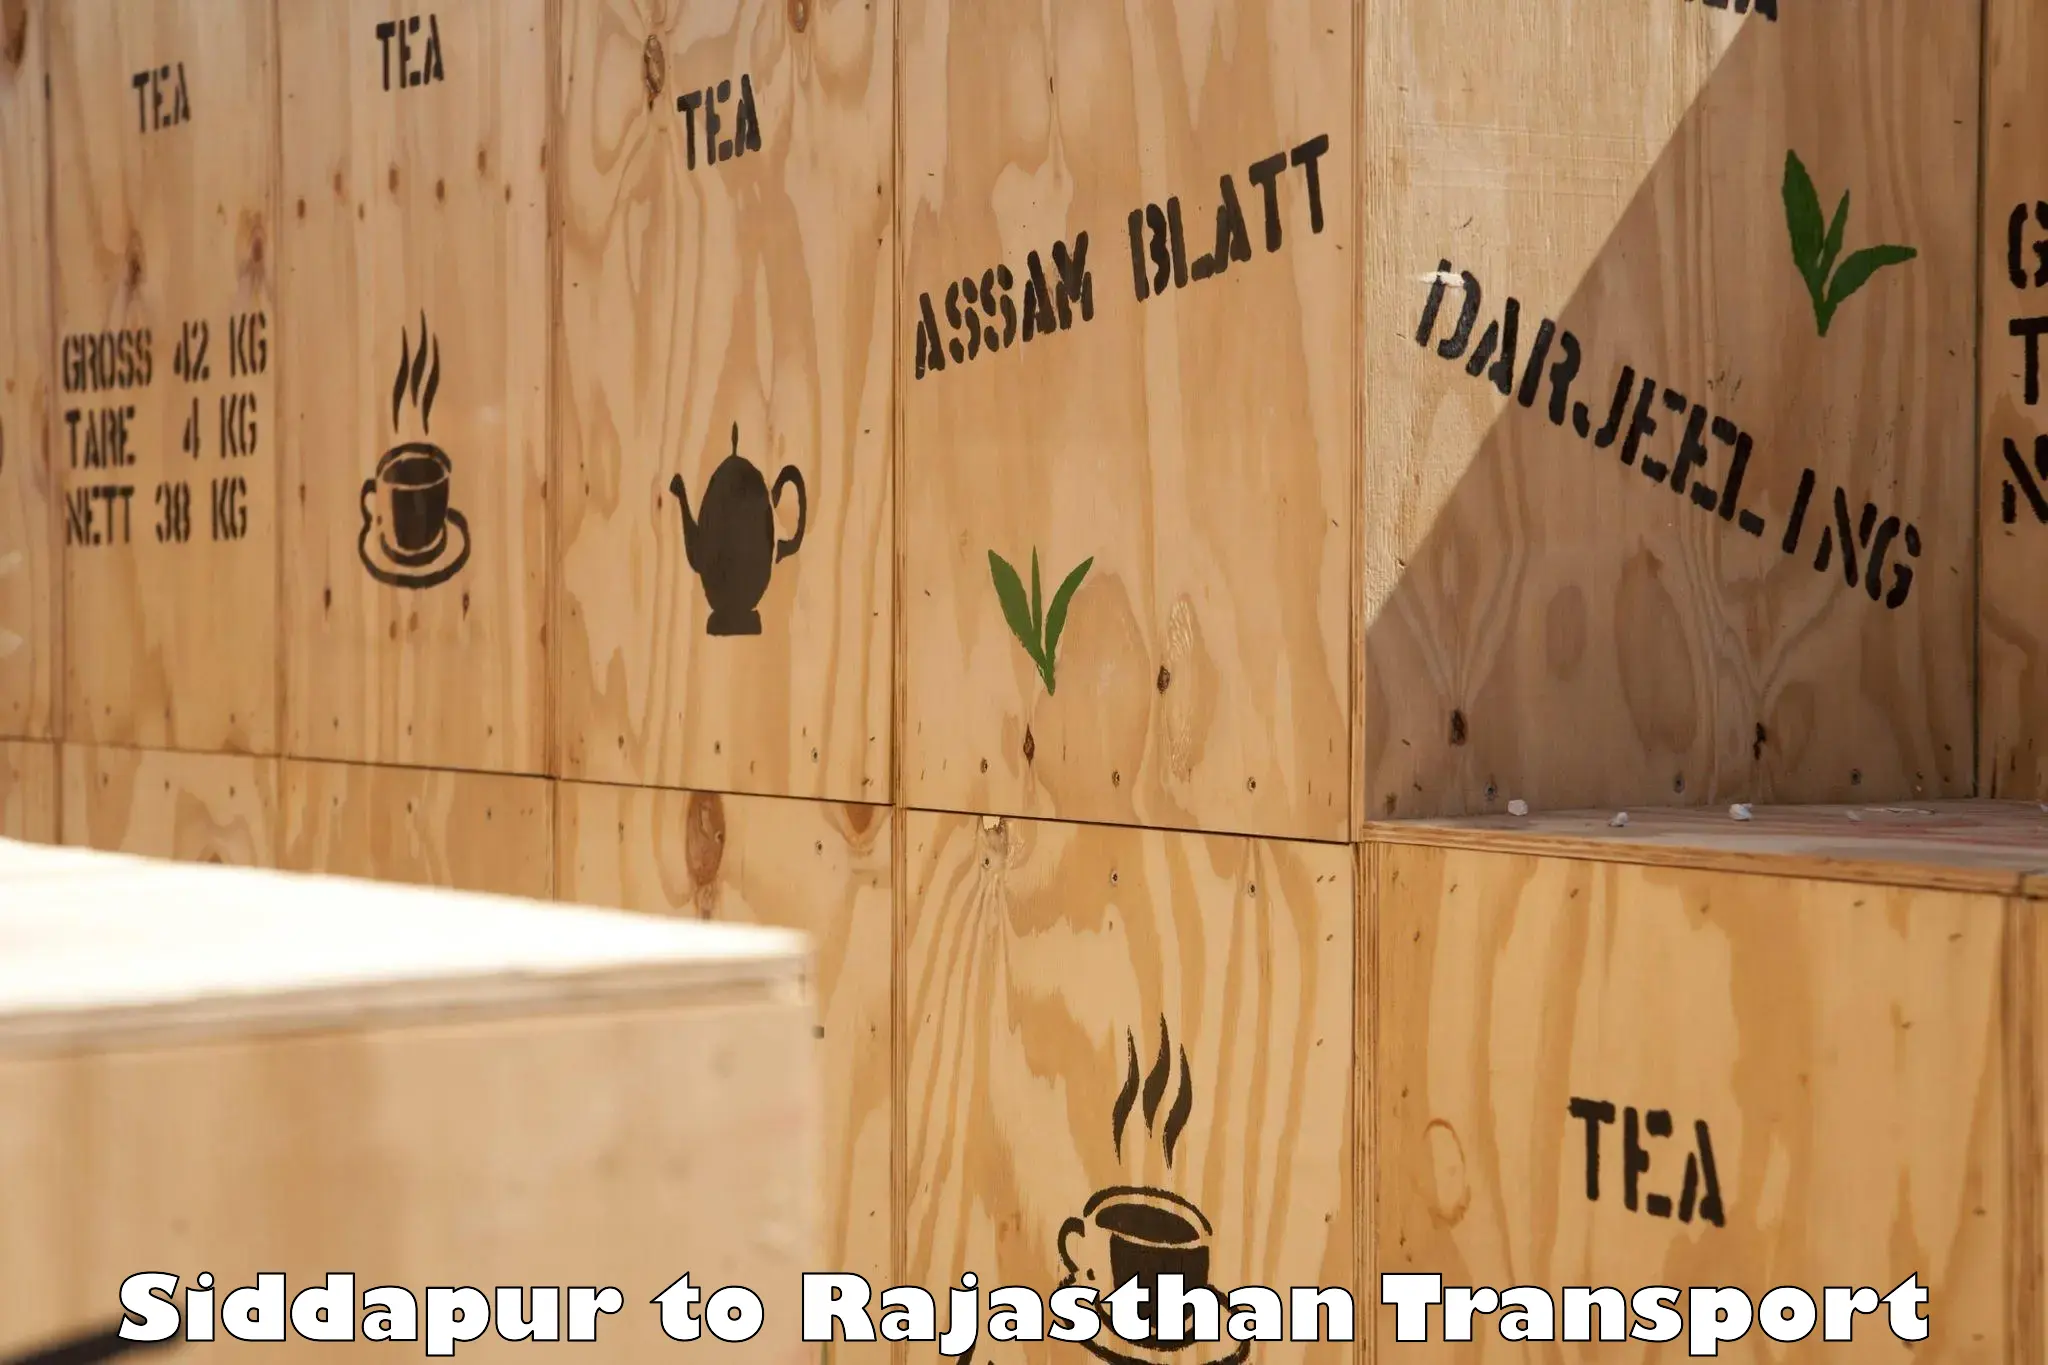 Truck transport companies in India Siddapur to Jaipur